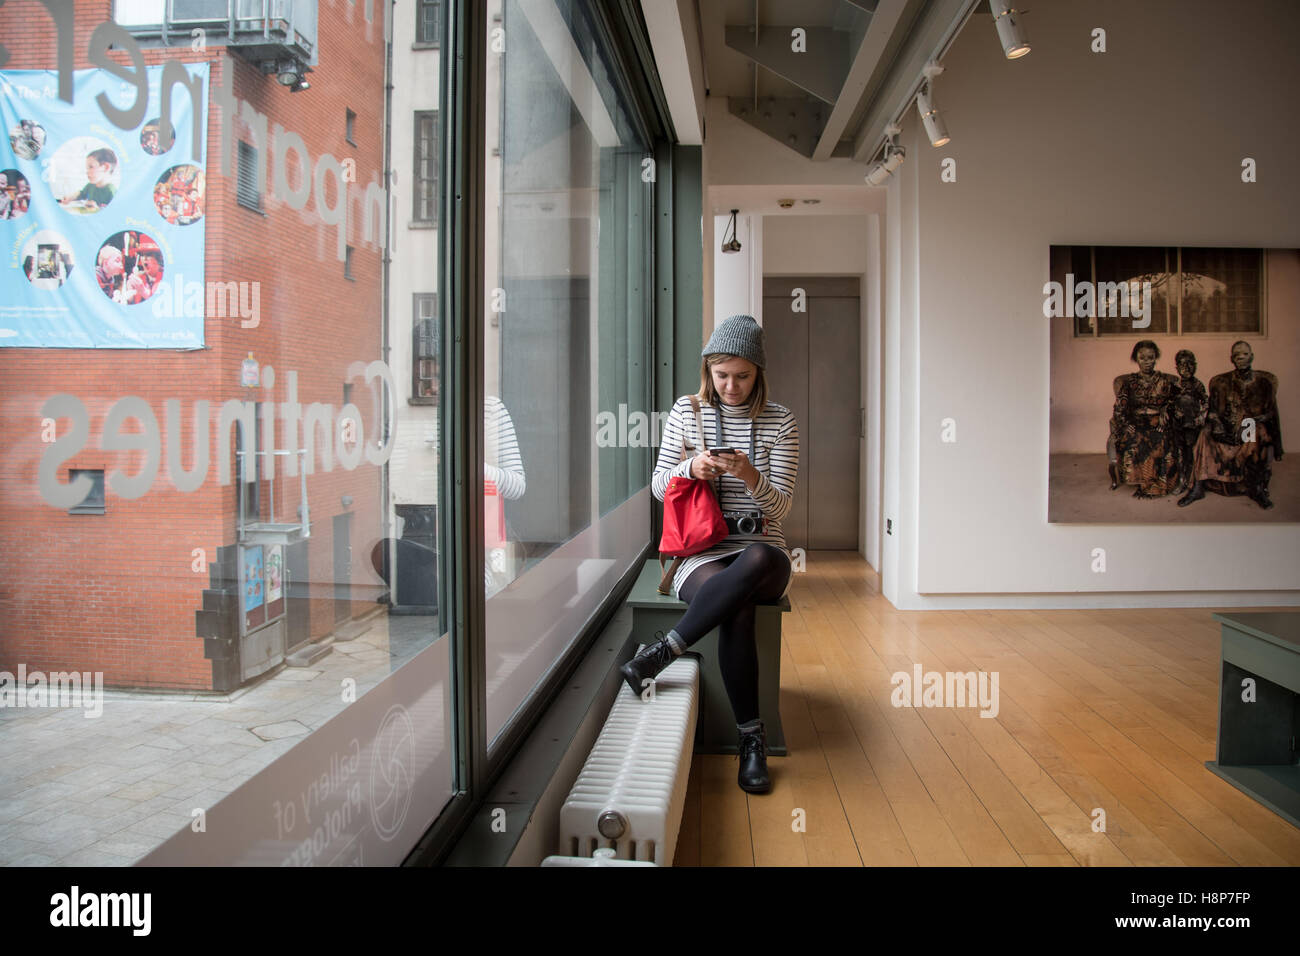 Dublin, Ireland- A young woman sitting inside of an art gallery on her phone in the city of Dublin. Stock Photo